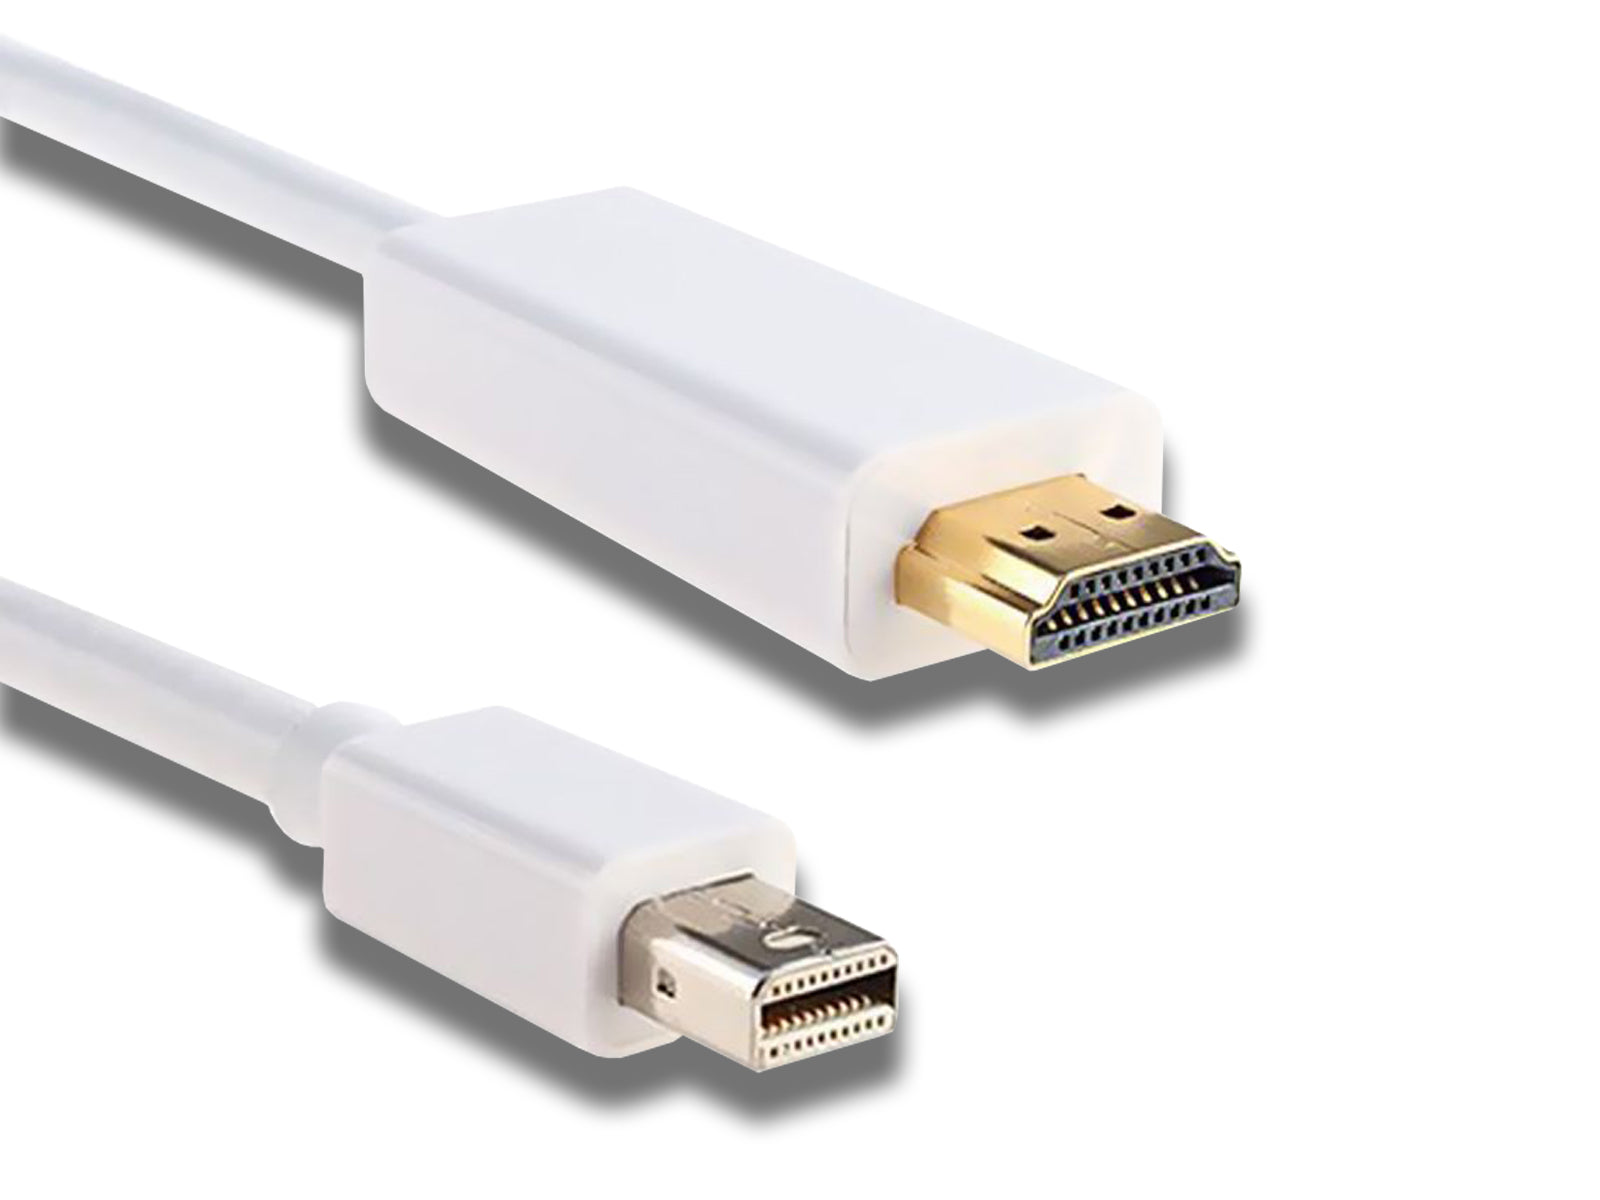 Mini DisplayPort to HDMI Cable Showing two Cables